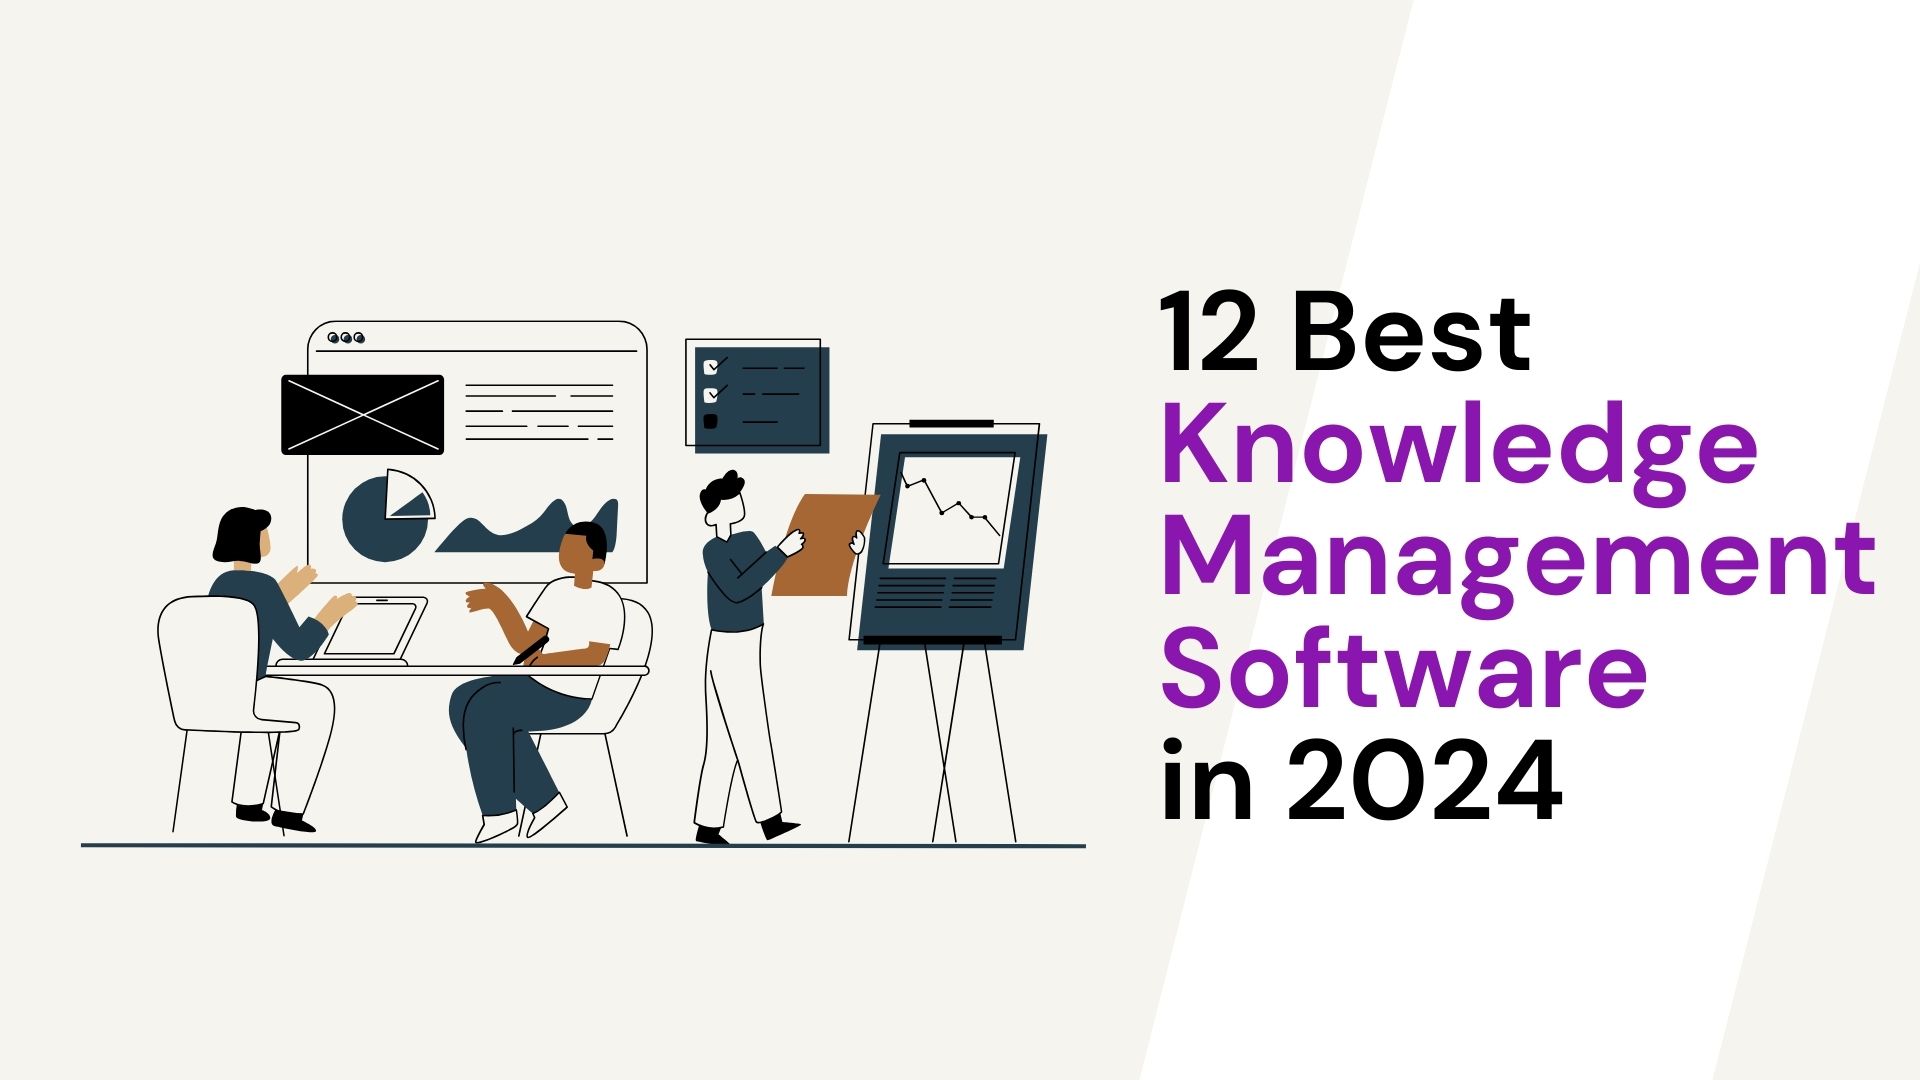 12 Best Knowledge Management Software in 2024